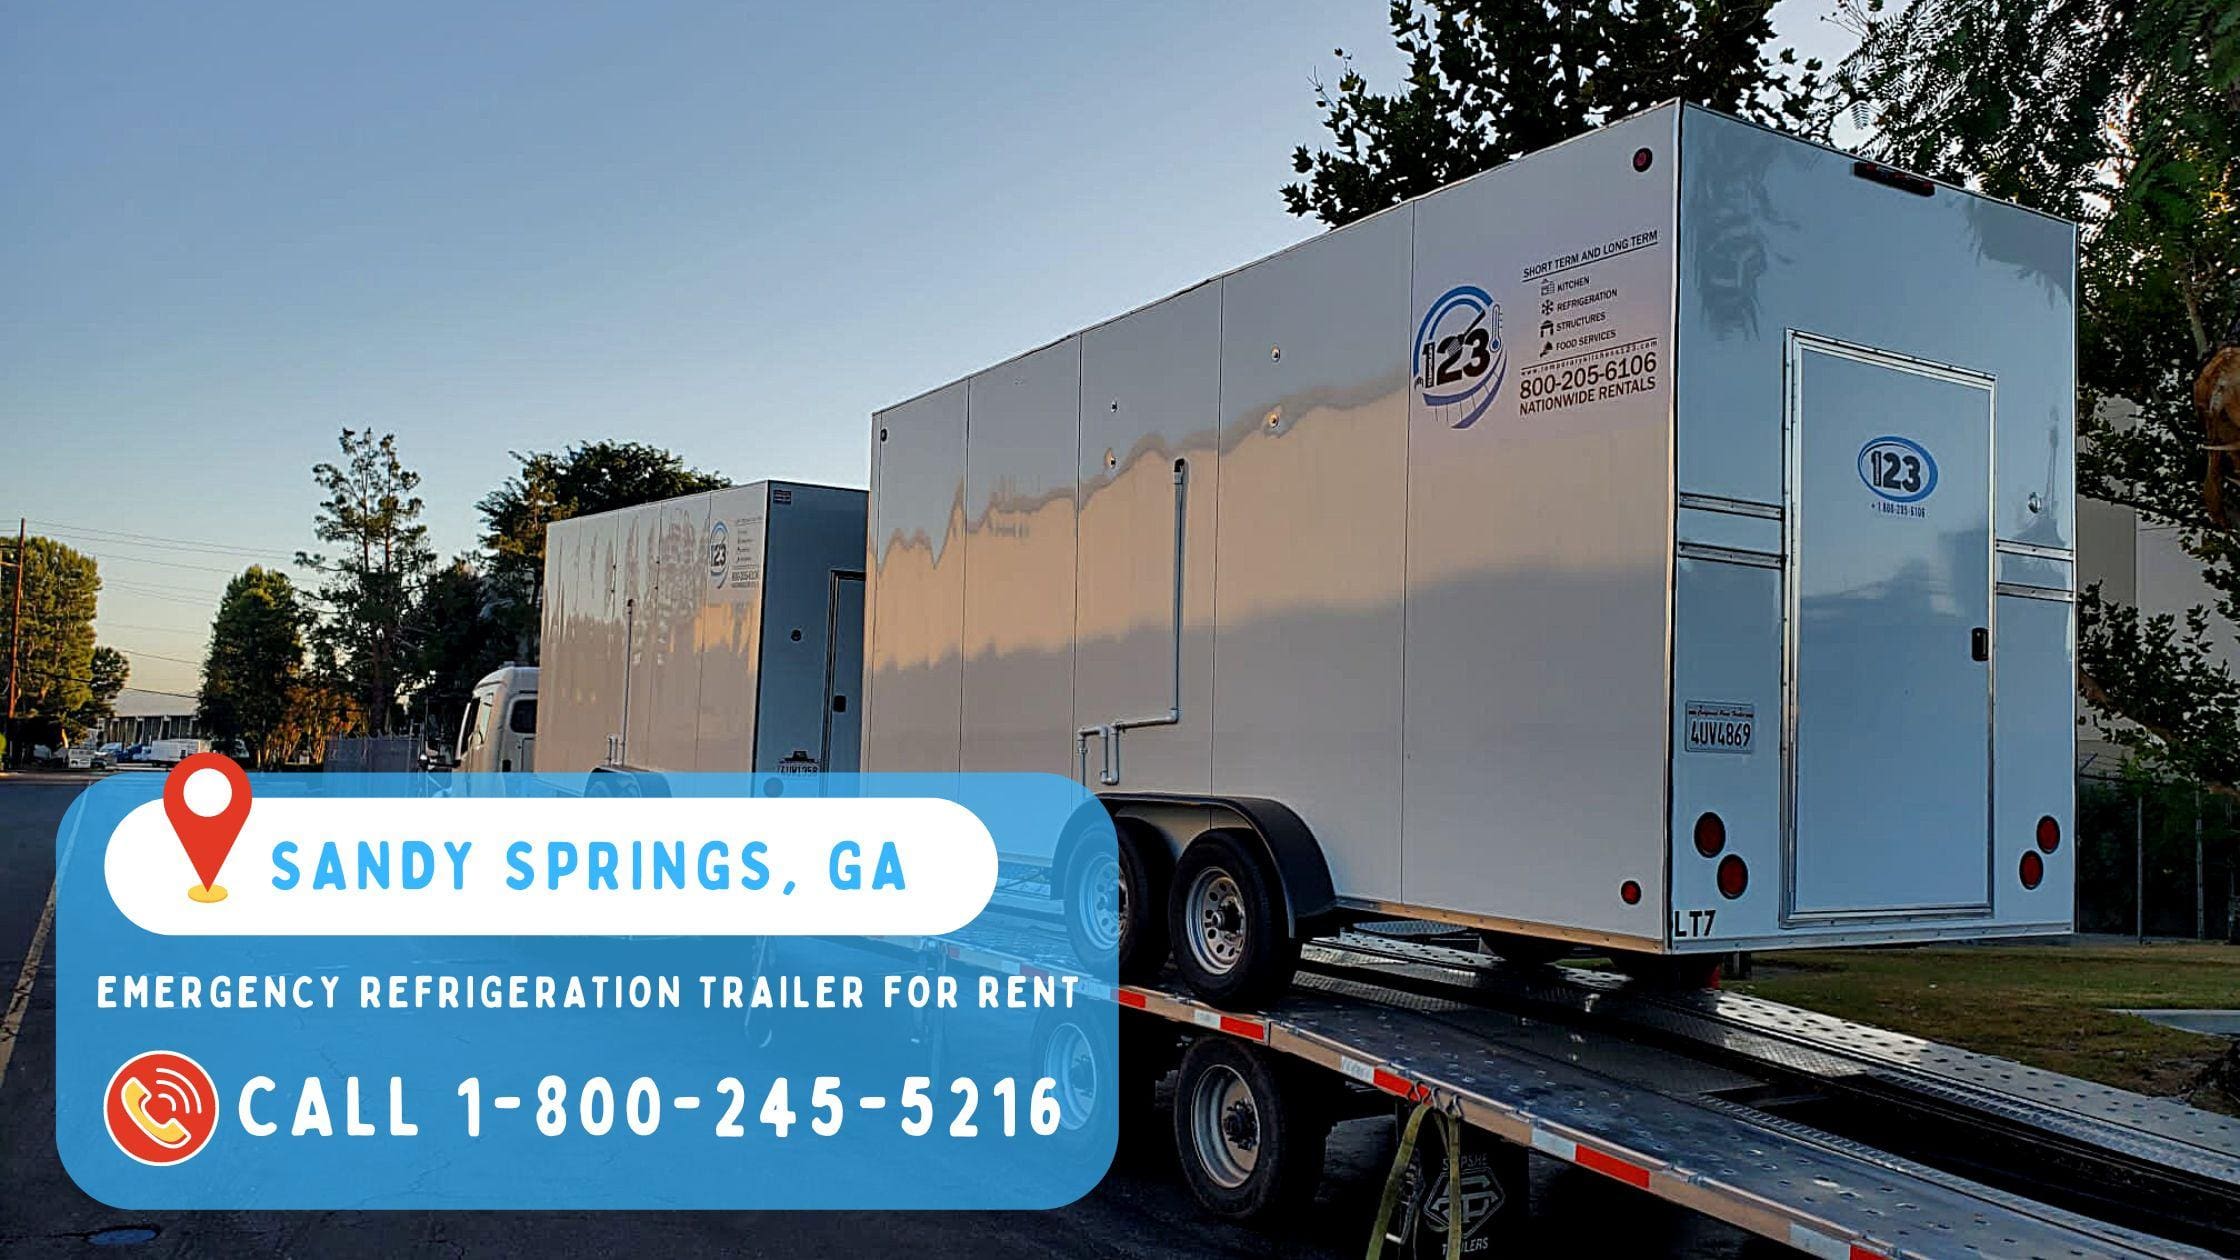 Emergency Refrigeration Trailer for Rent in Sandy Springs